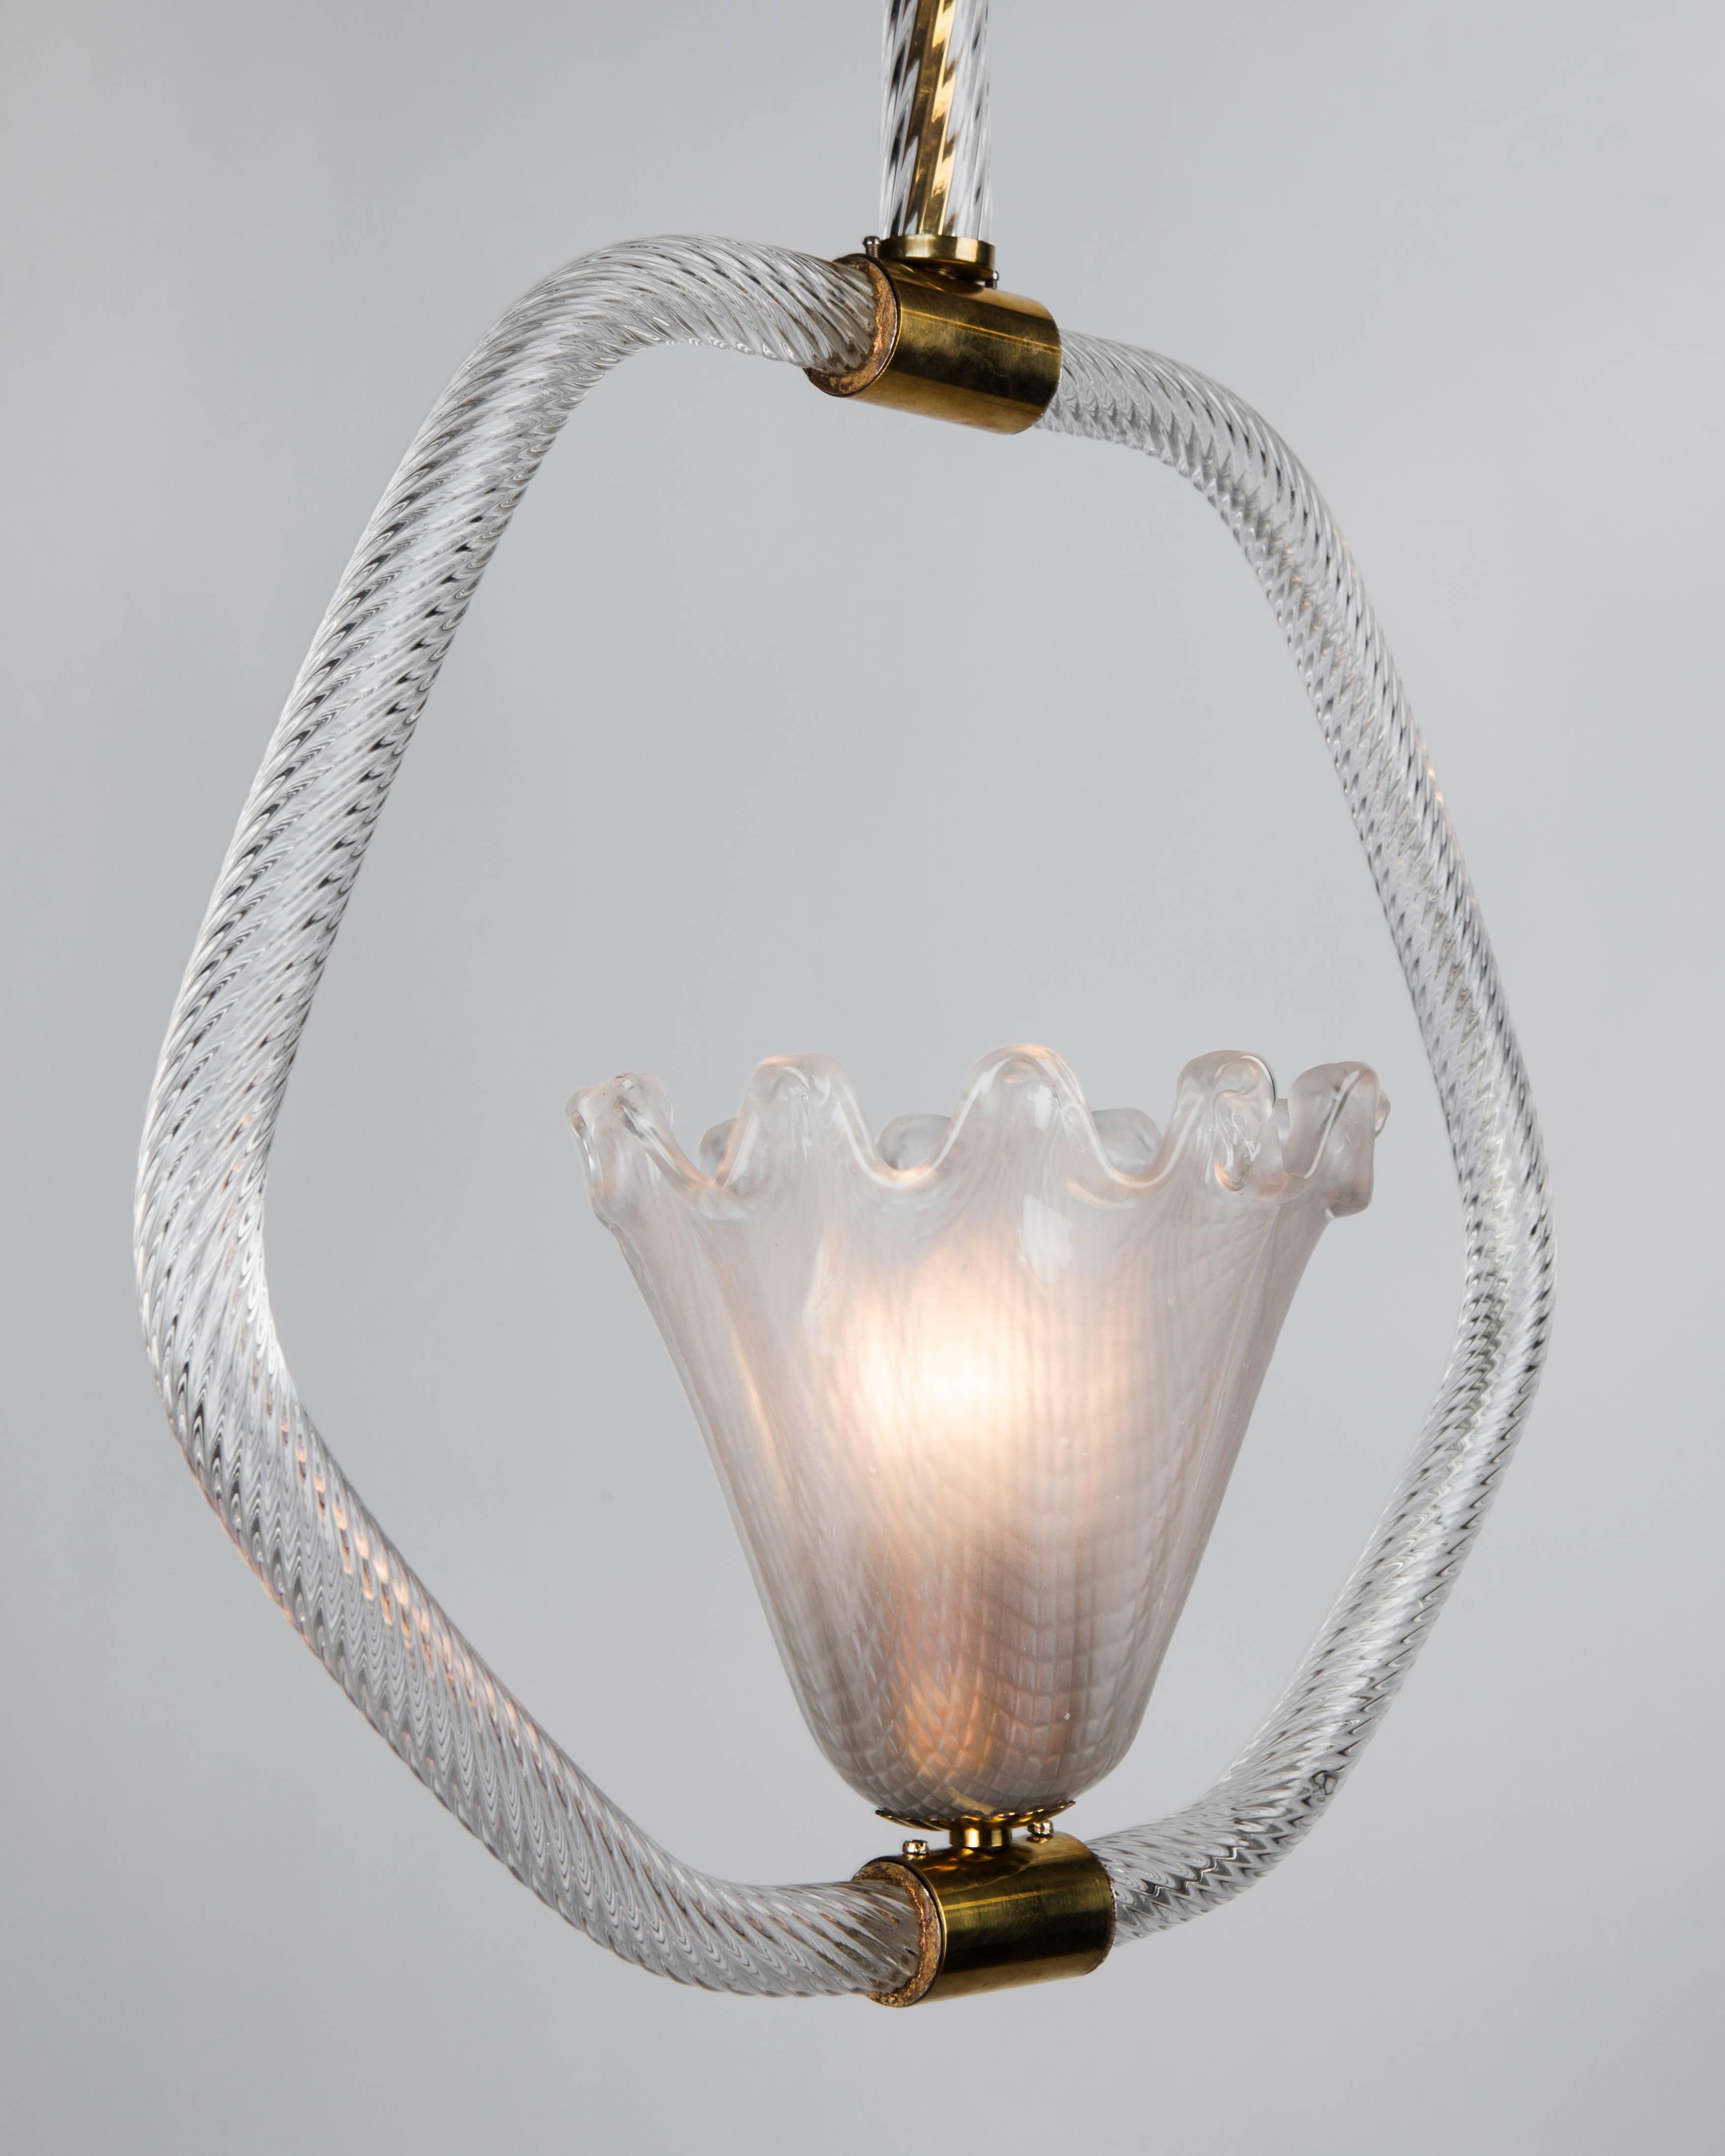 AHL4010.
A glass semi-flush mounted pendant with a rope-twist detailed hoop-form body and stem with the central element and canopy having hatch-marked textures and scalloped edges. The brass fittings in their original aged finish. By the Italian